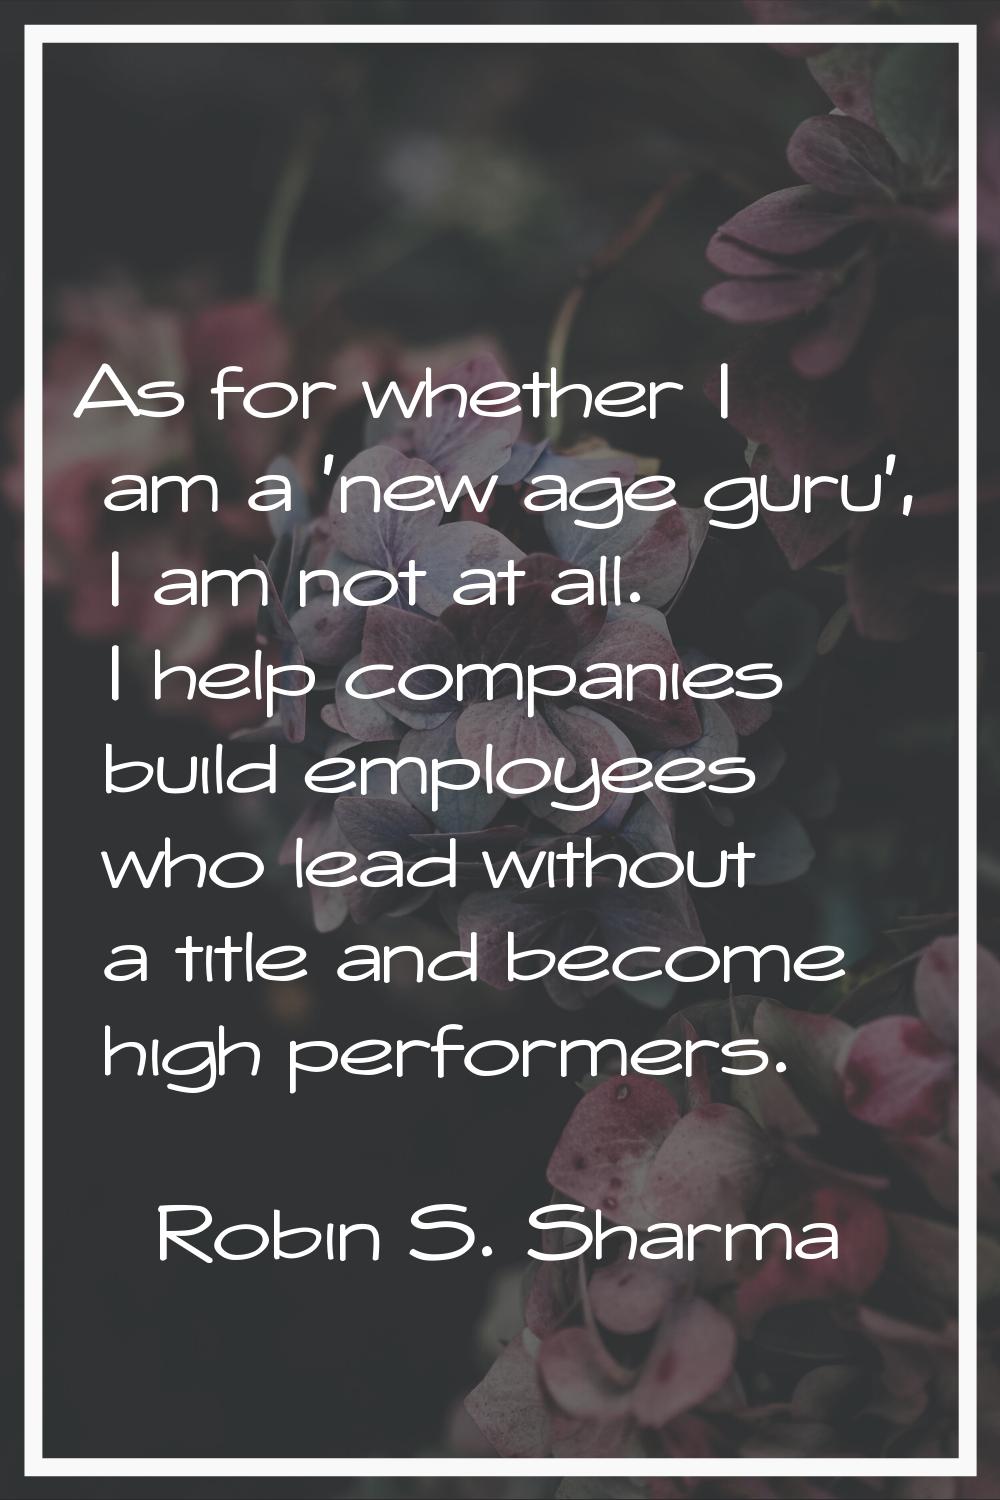 As for whether I am a 'new age guru', I am not at all. I help companies build employees who lead wi